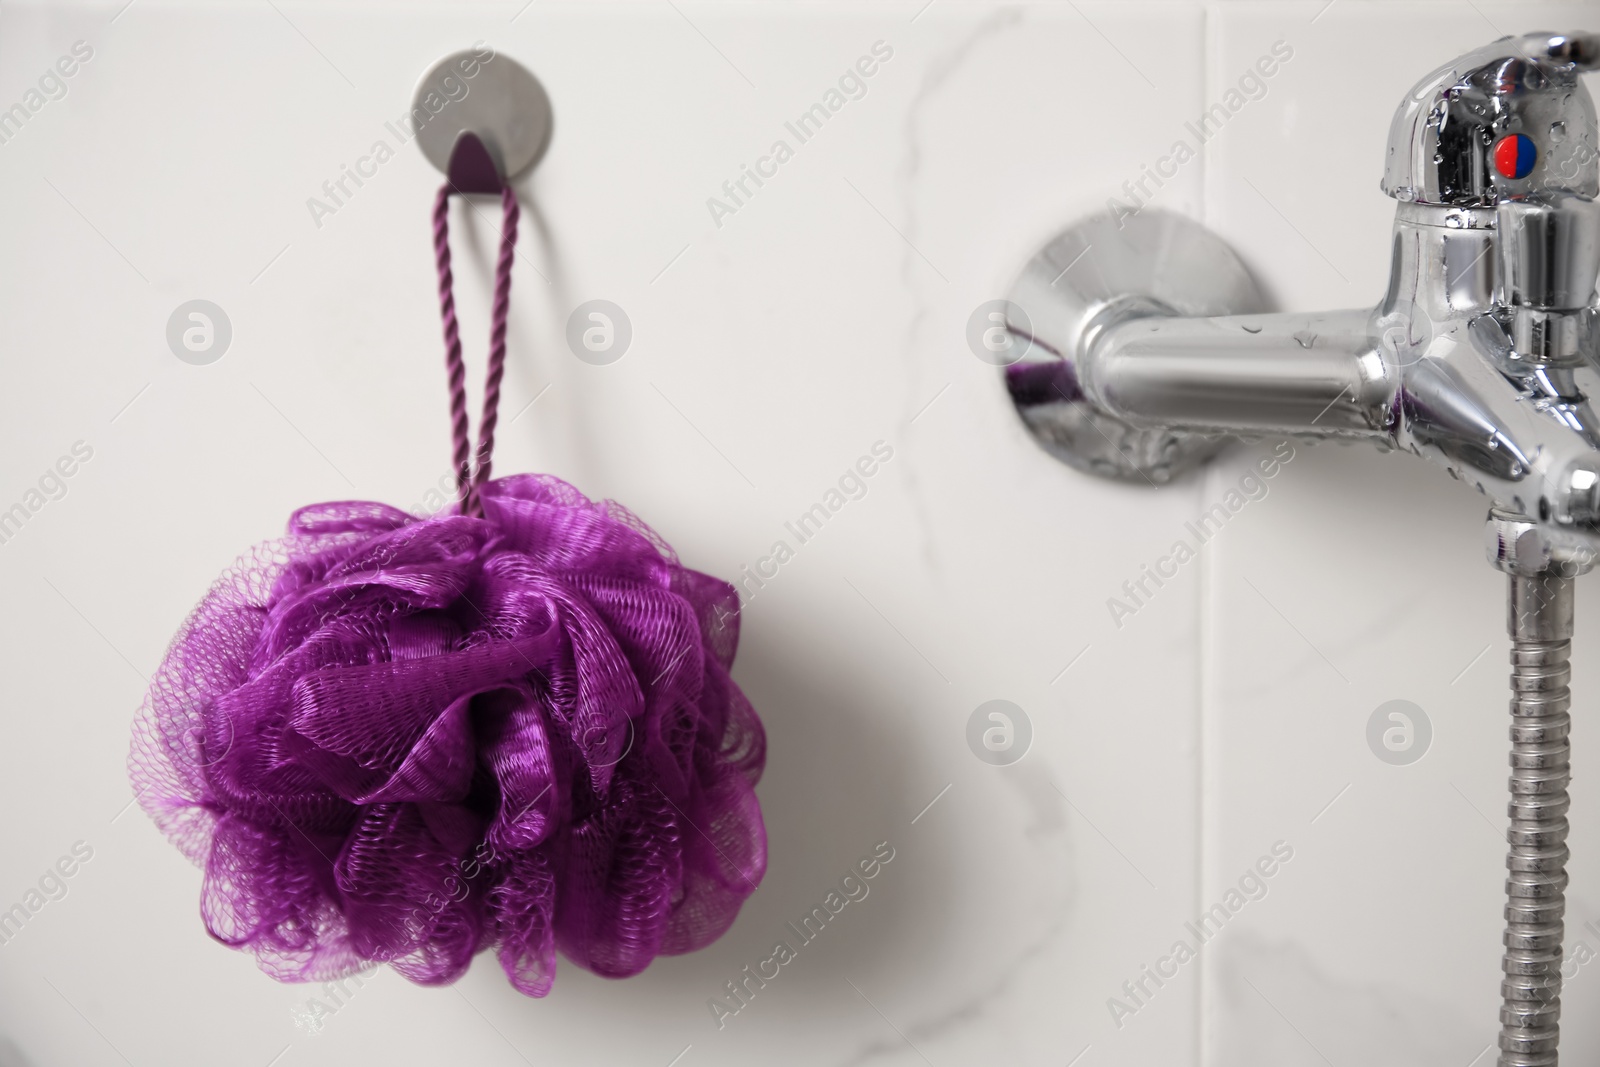 Photo of Purple shower puff hanging near faucet in bathroom